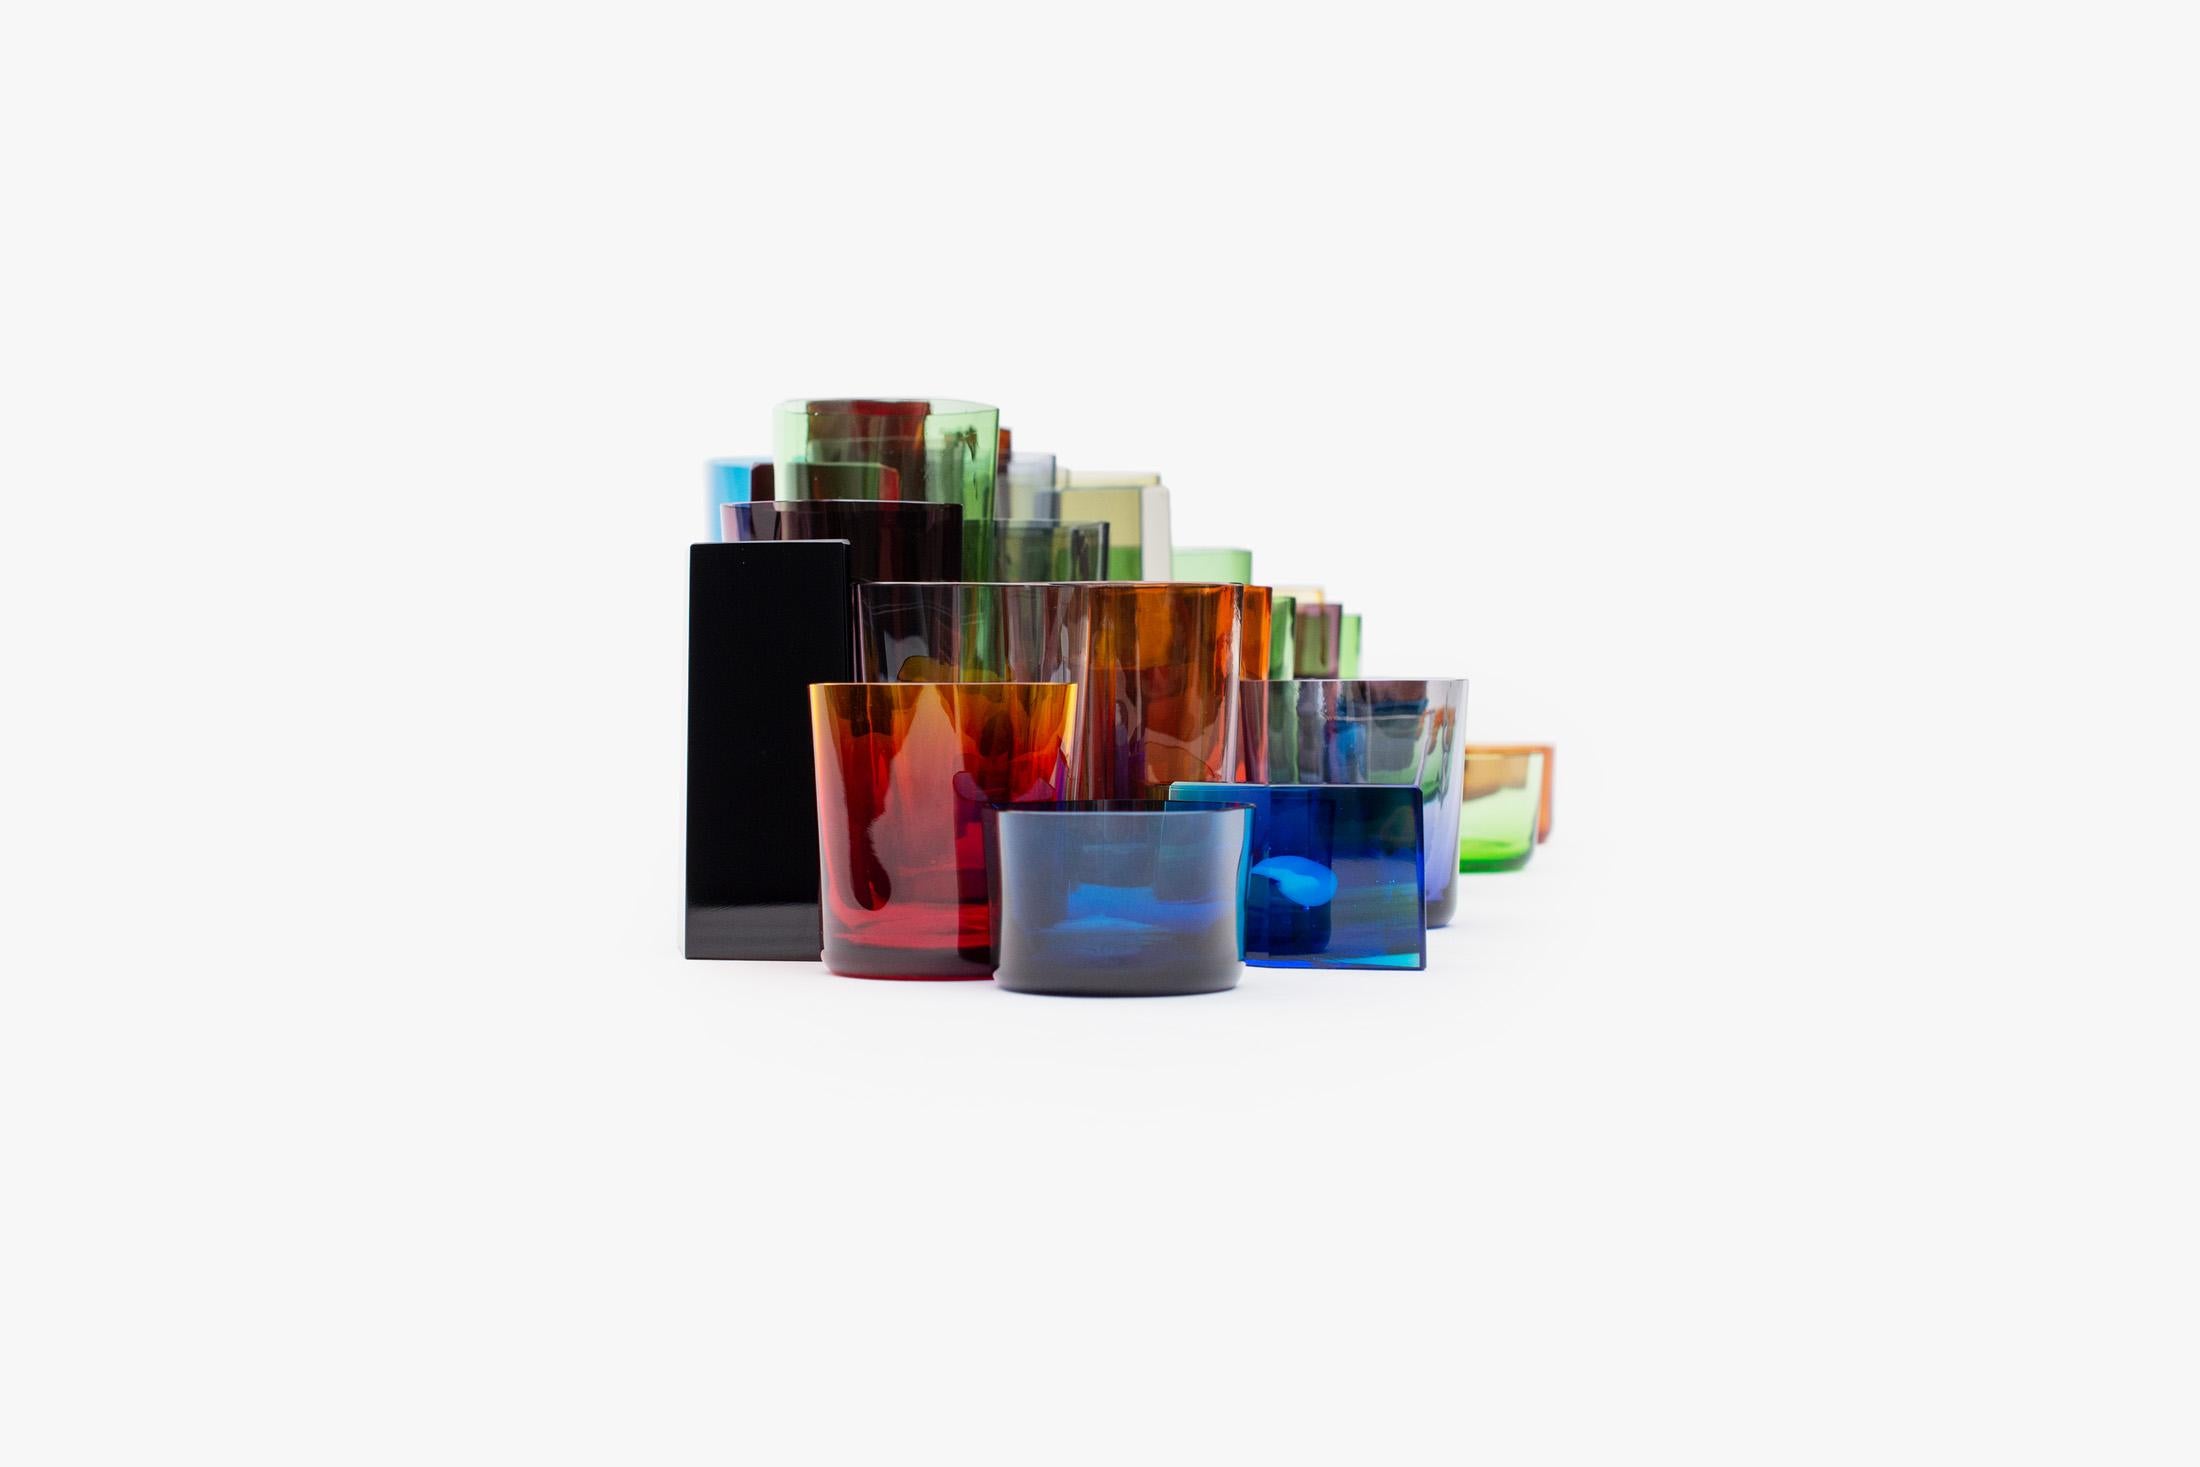 Polygon Glassware by Omer Arbel For OAO Works, Geometric Blown Glass Sculpture (Tschechisch) im Angebot